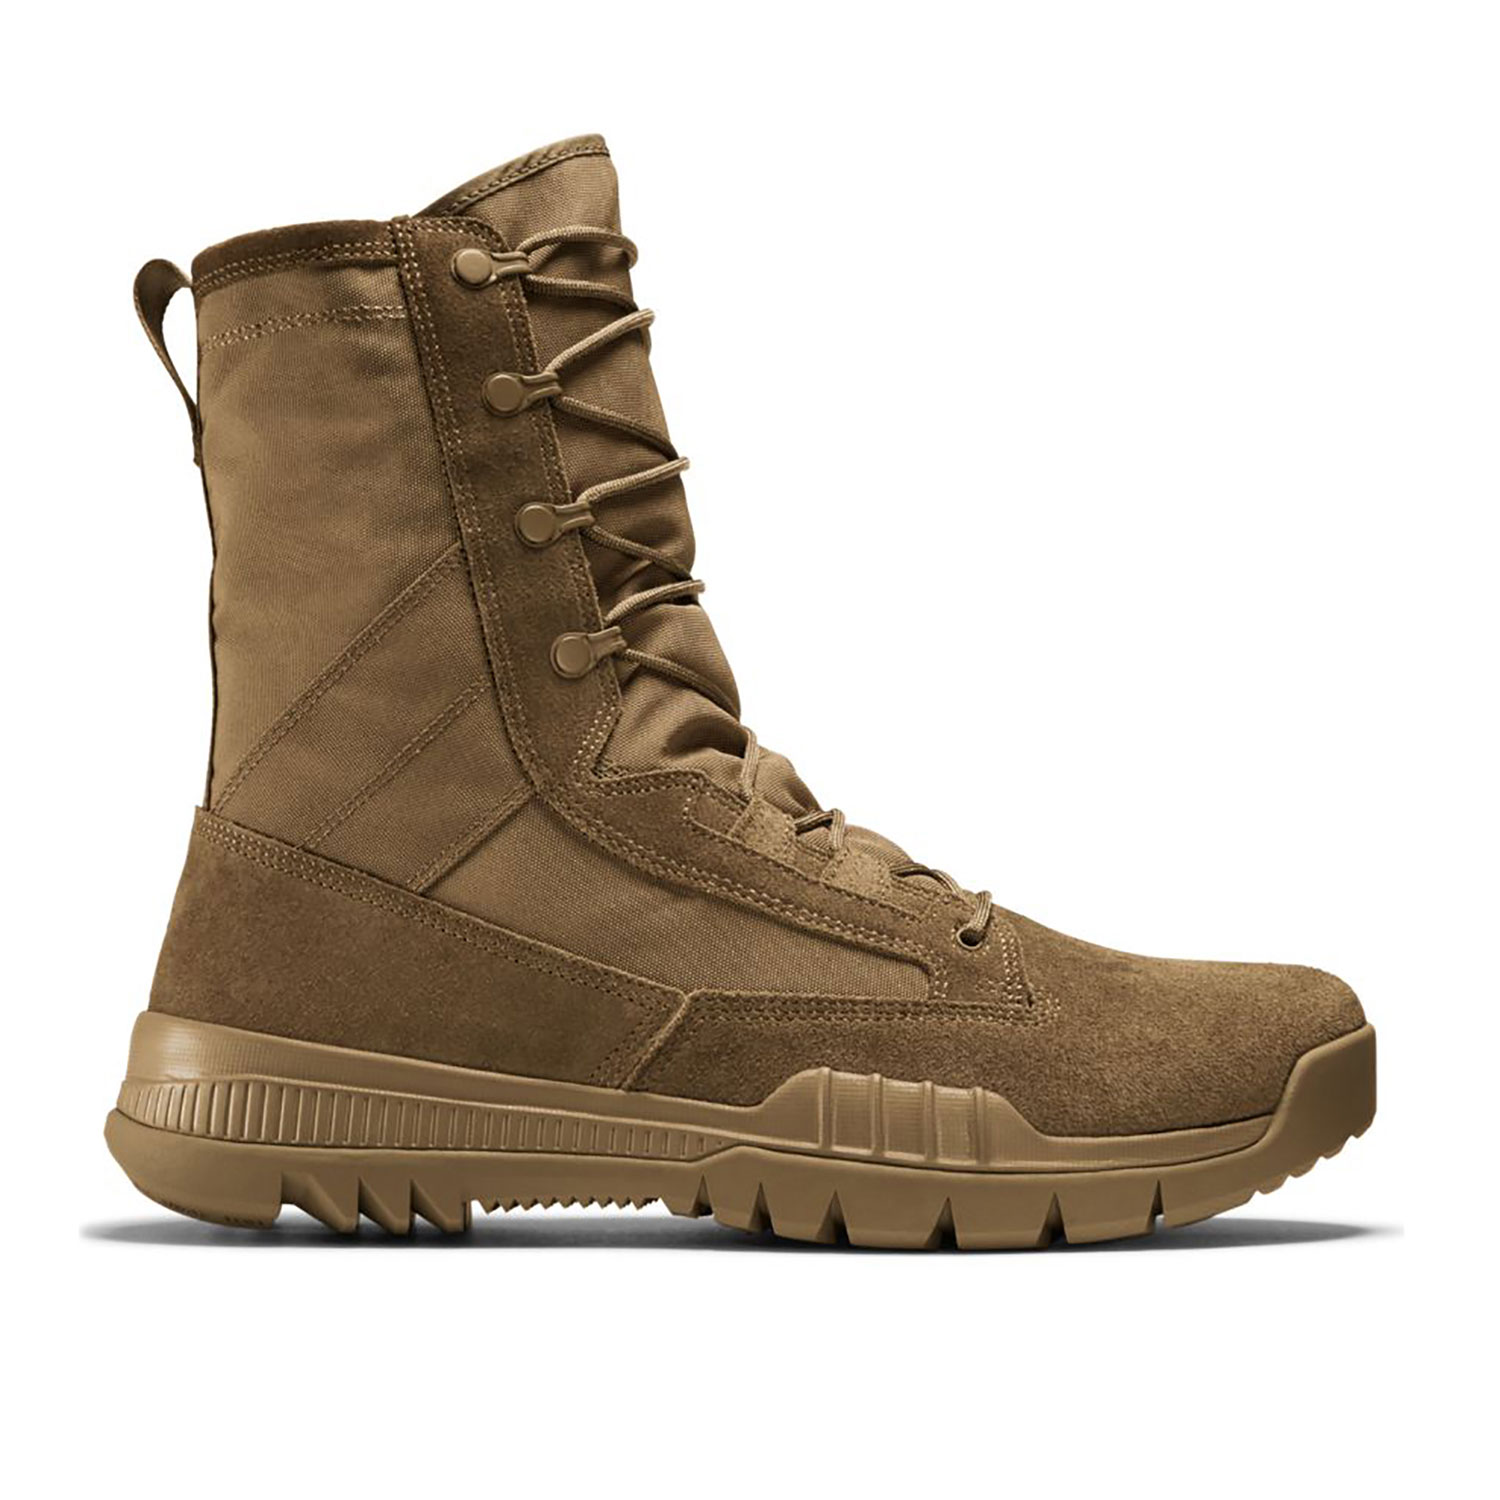 Nike SFB Field 8" Leather Men's Boot